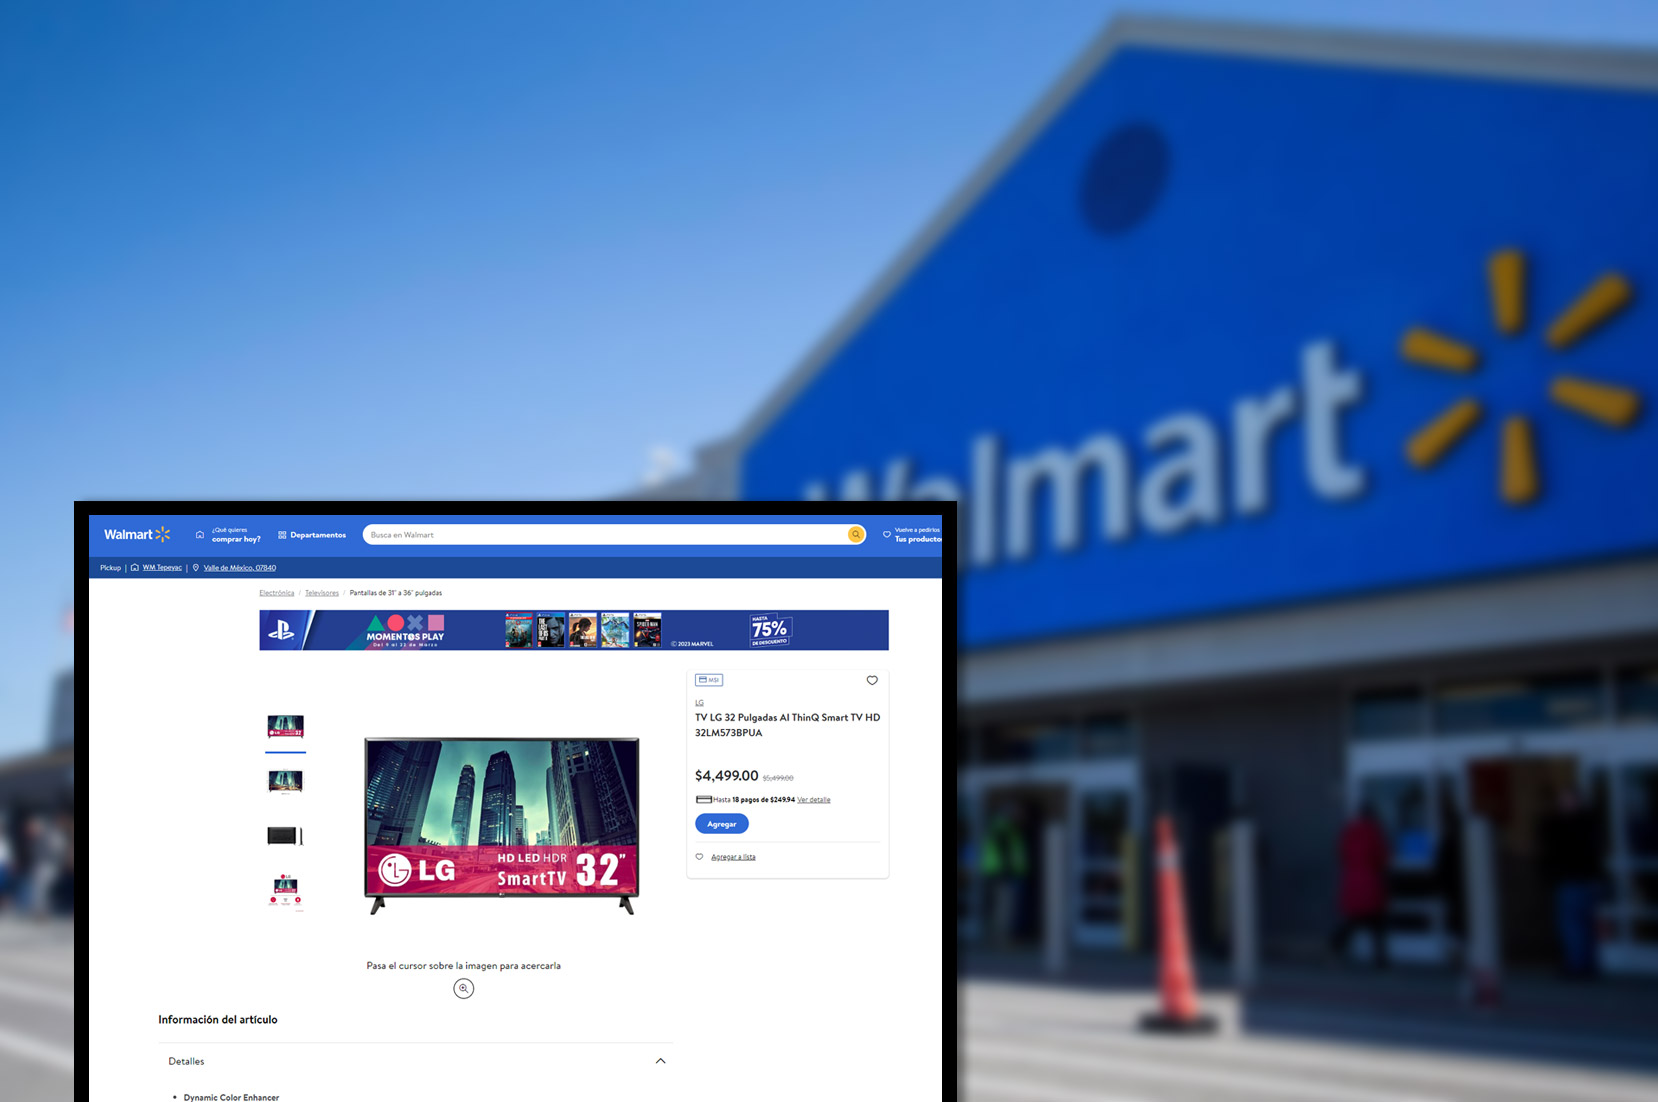 walmartproduct-pricing-information-and-image-scraping-services